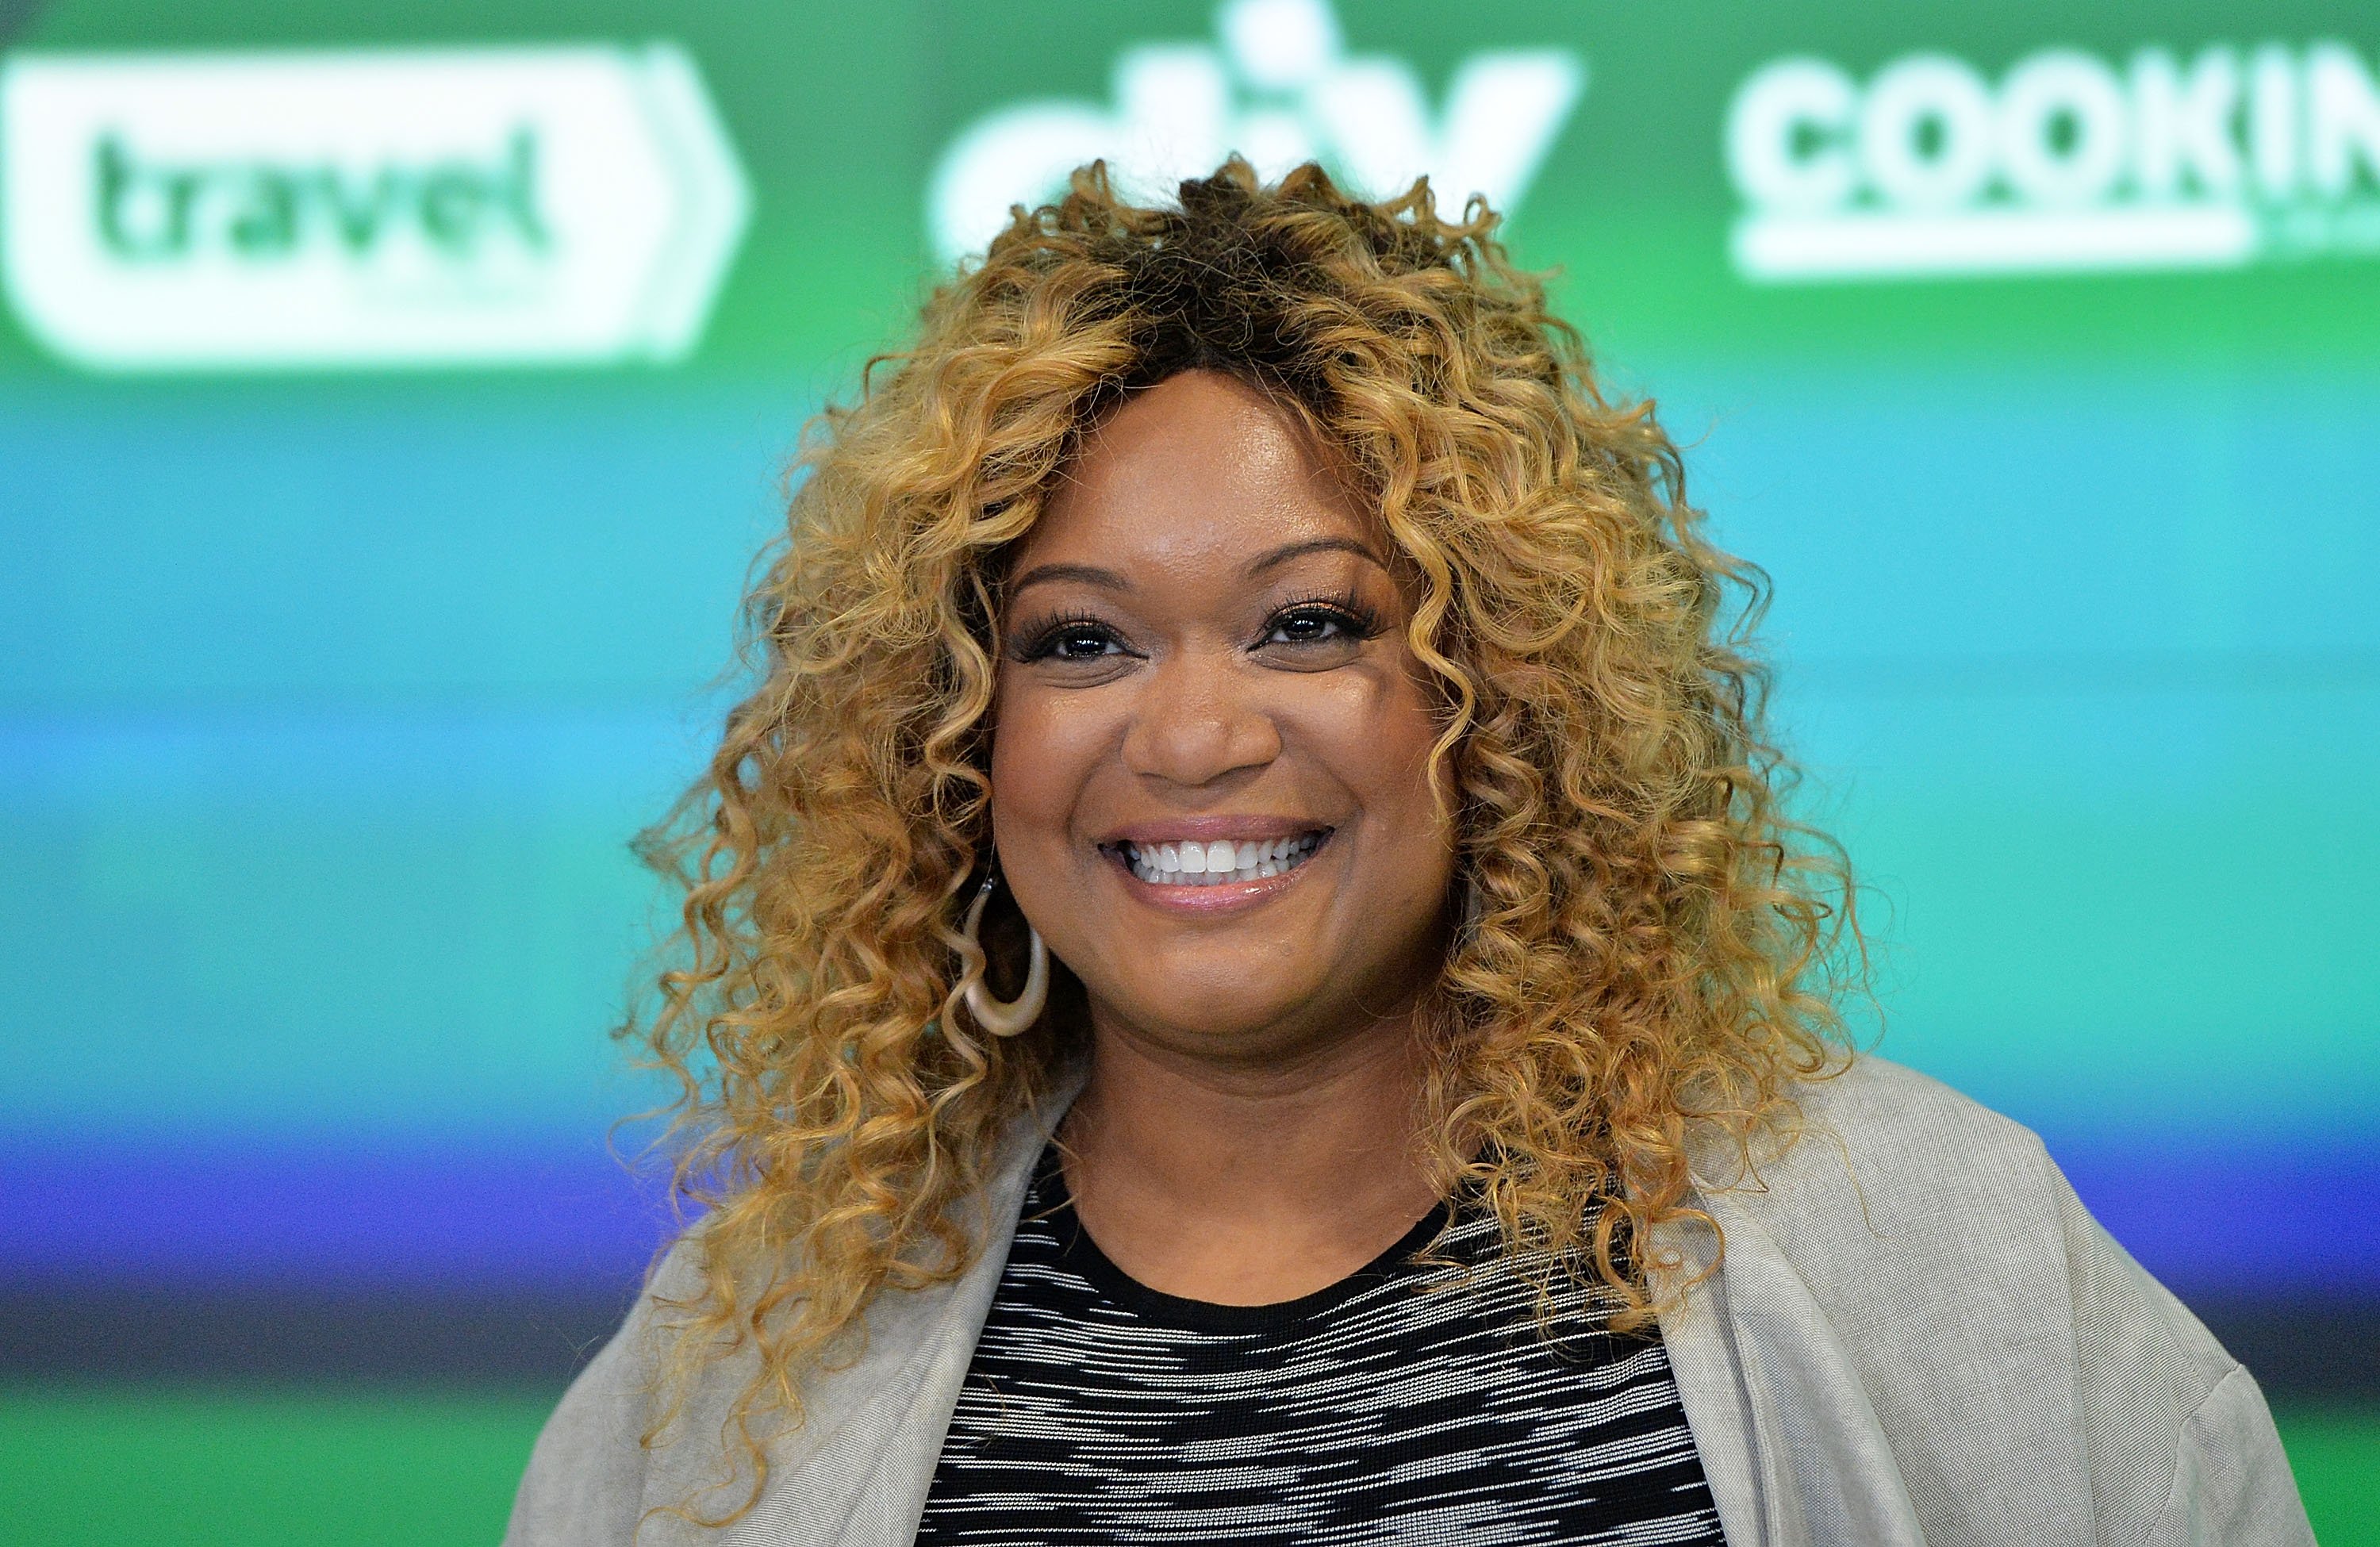 Food Network star Sunny Anderson wears a striped black blouse in this photograph.